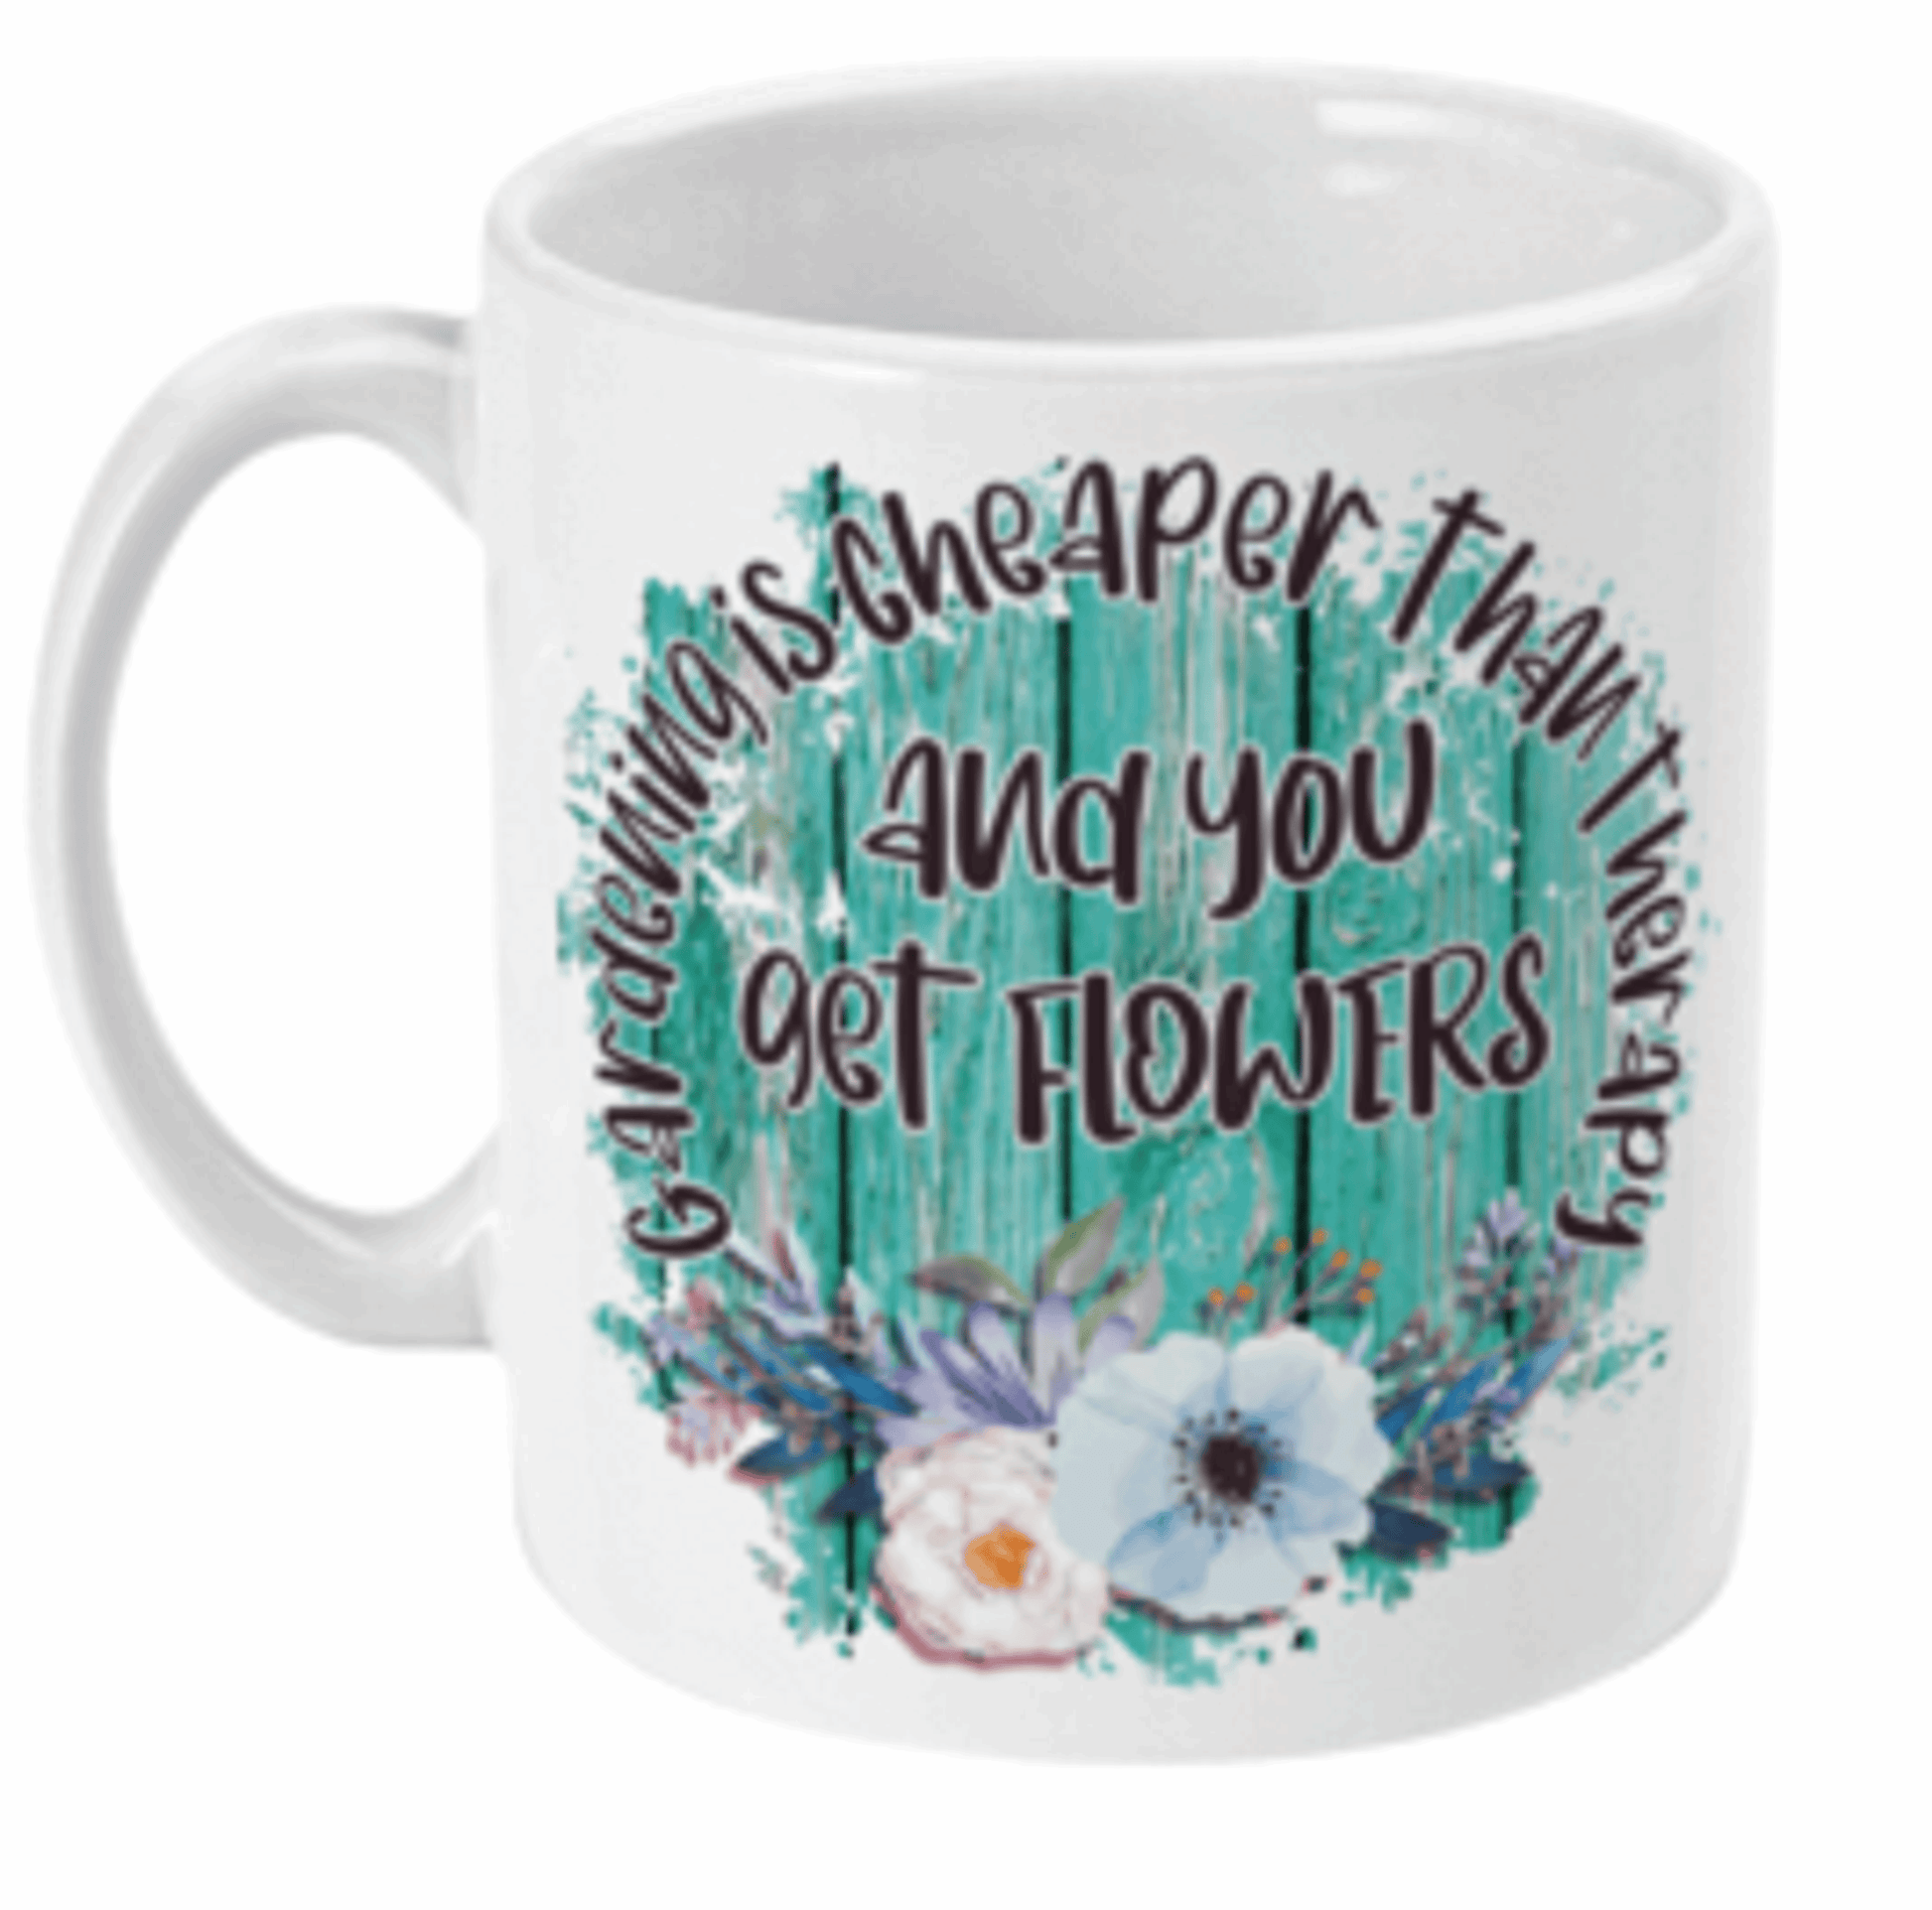  Gardening is Cheaper Than Therapy Coffee Mug by Free Spirit Accessories sold by Free Spirit Accessories